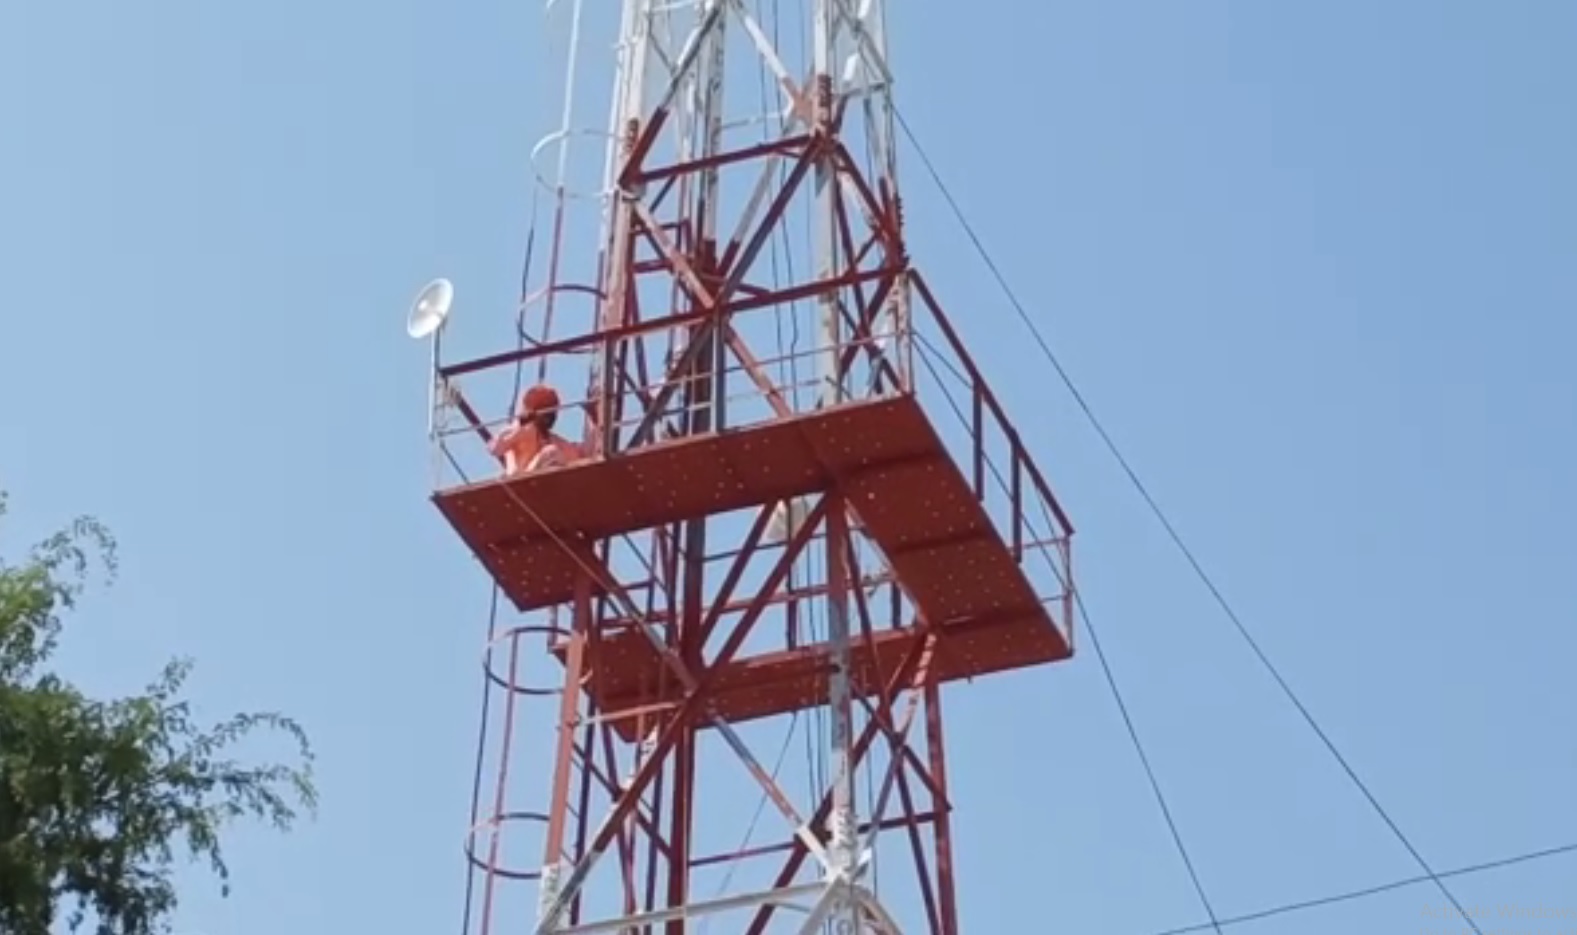 Baba climbed the wireless tower in the police station